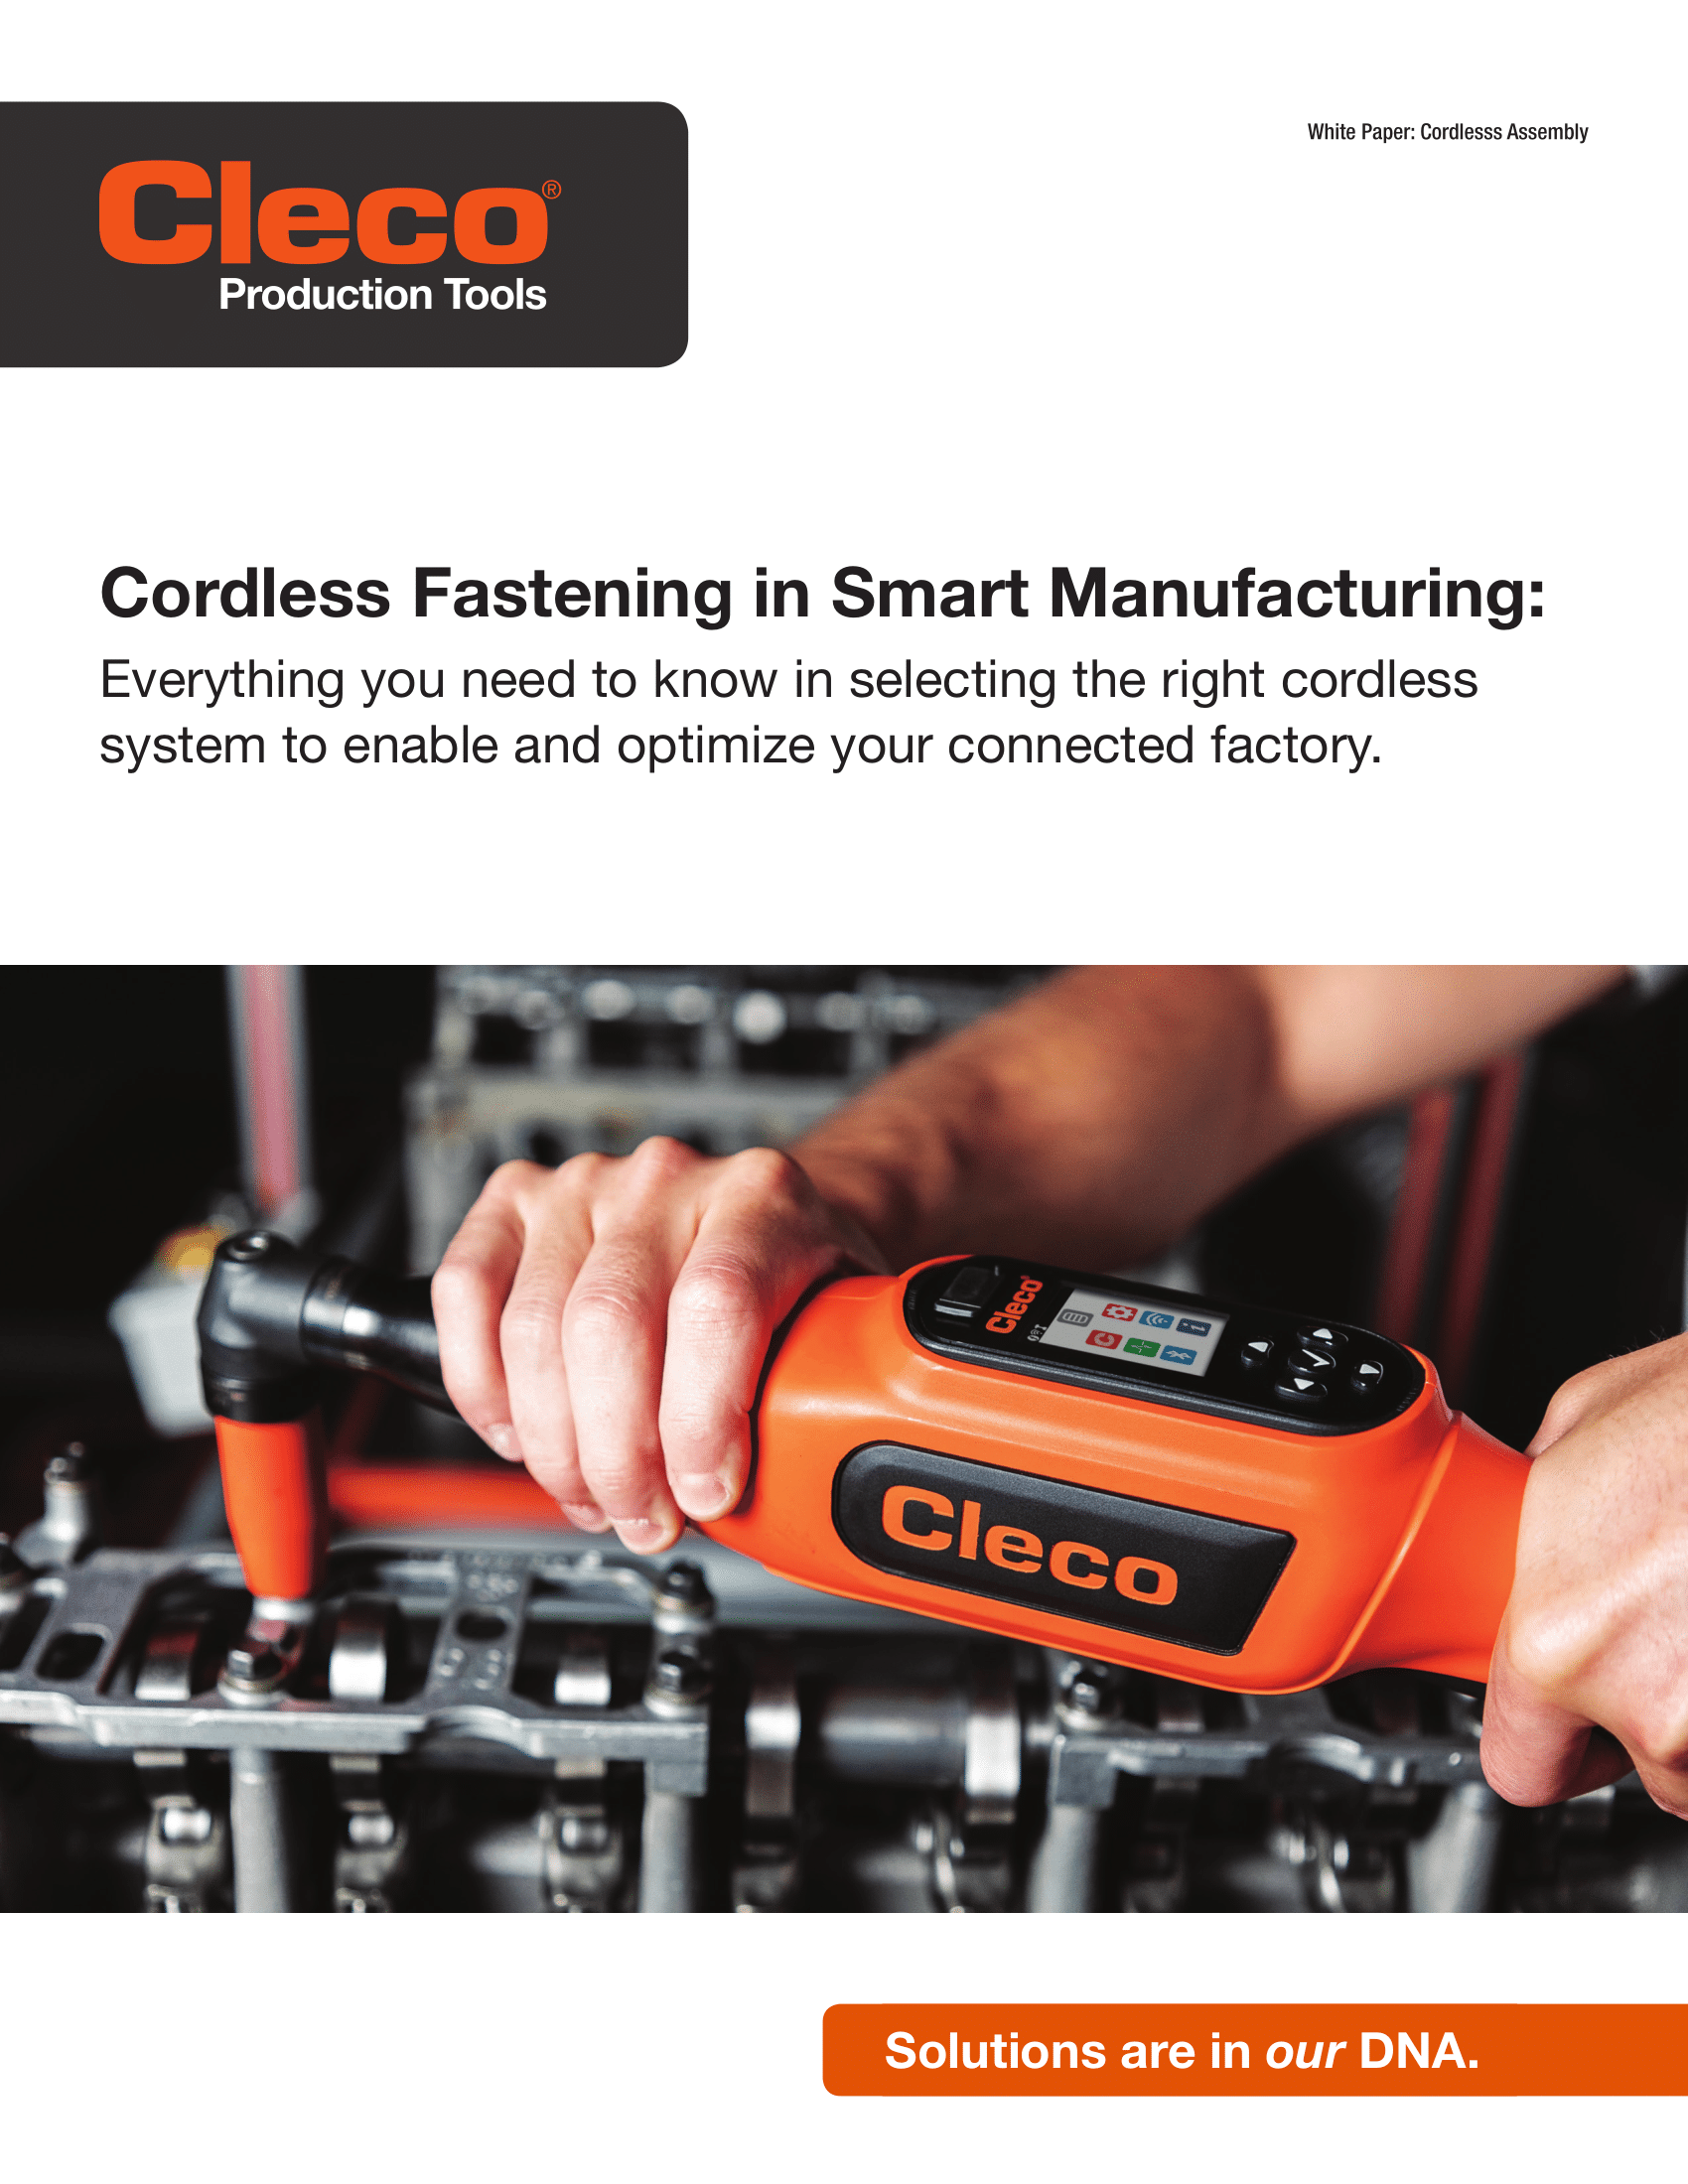 White Paper - Cordless Assembly